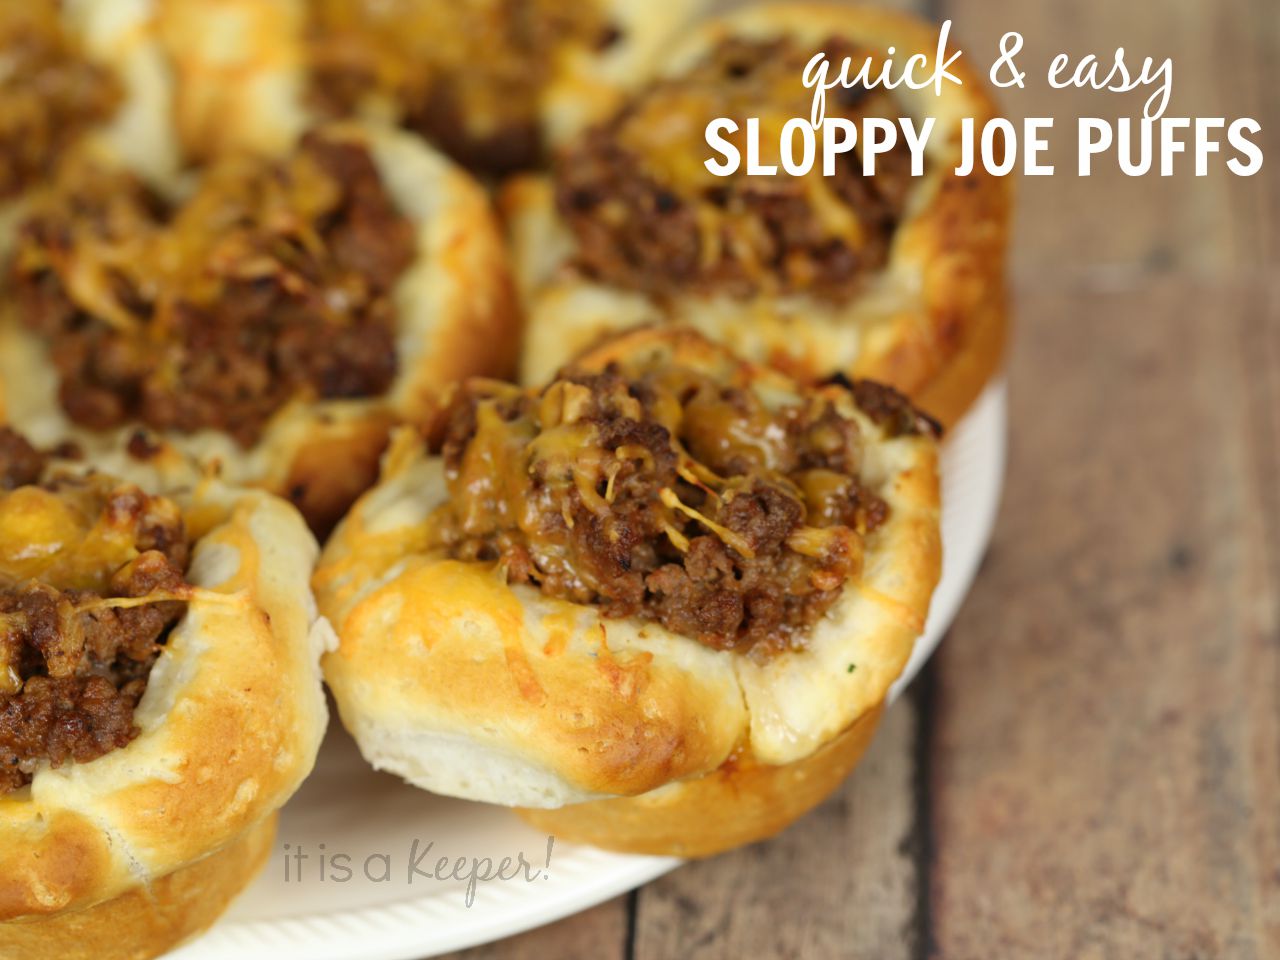 This recipe for quick and easy sloppy joe puffs has become one of my son's favorite dinners